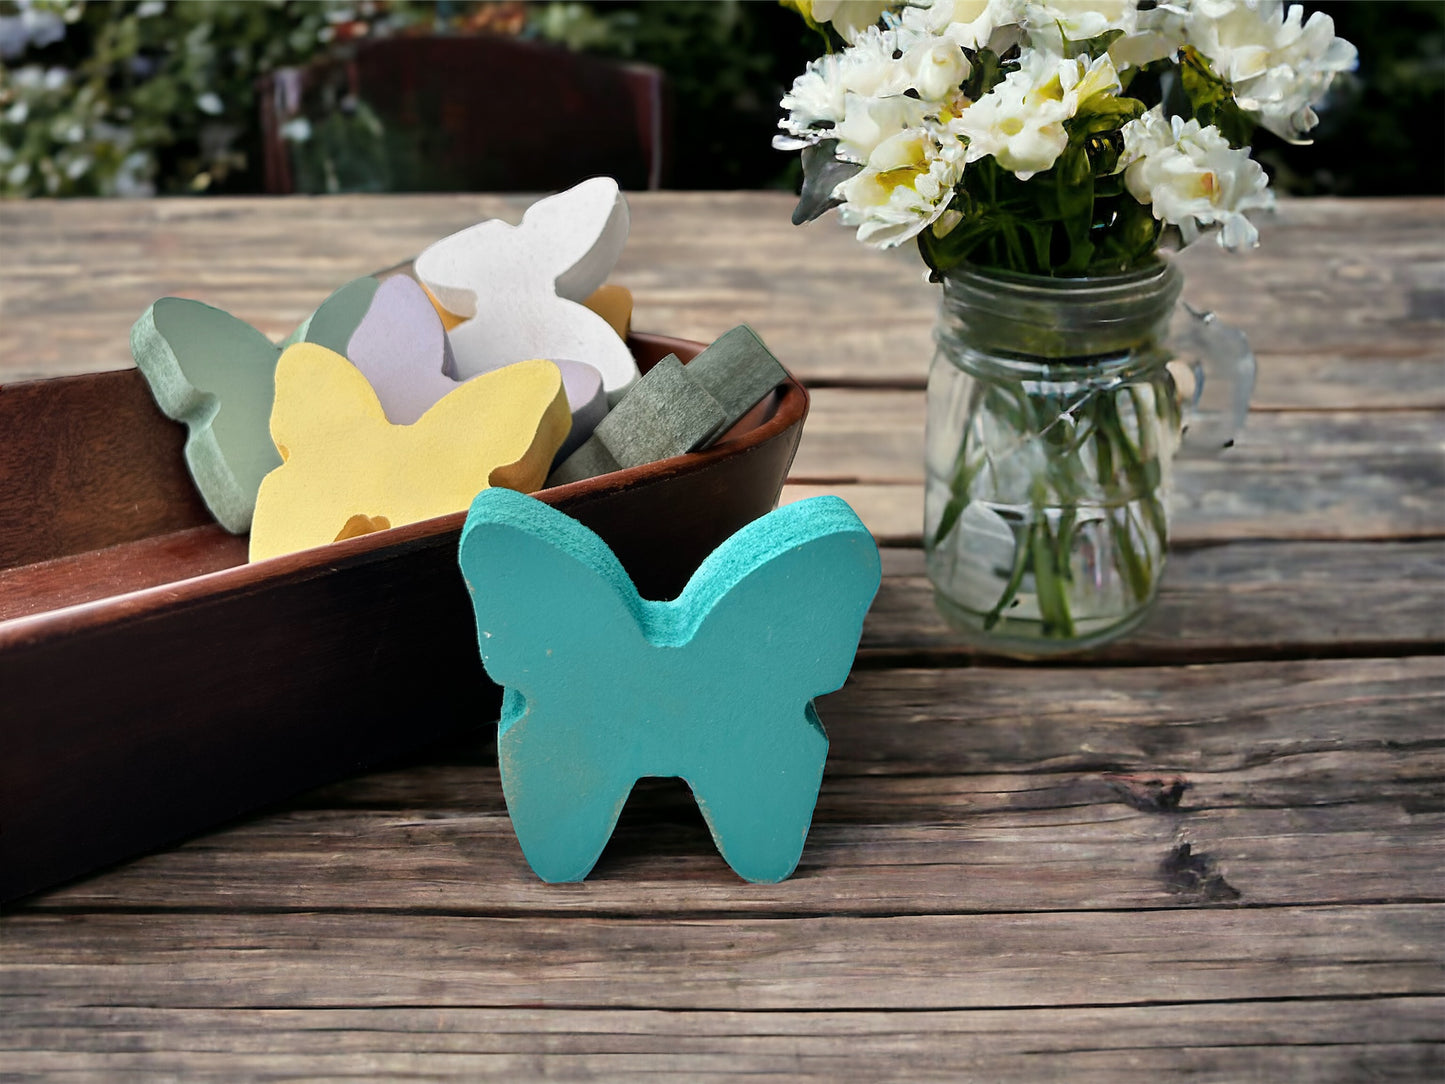 Primitive/Rustic MINI Wood Butterfly Bowl Fillers - set of 3